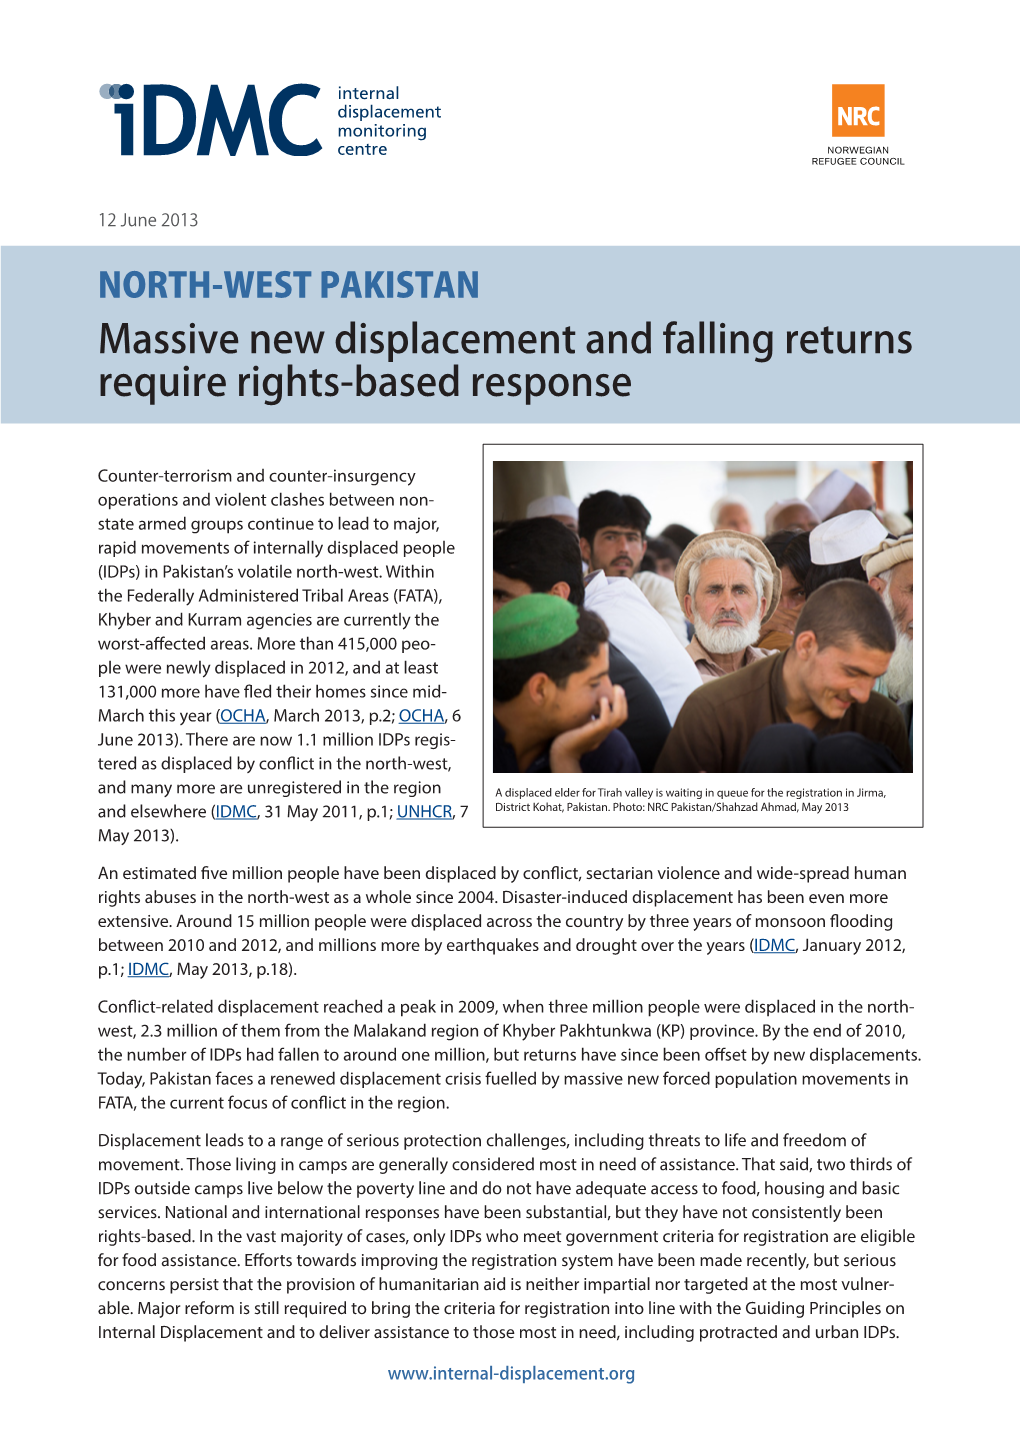 PAKISTAN Massive New Displacement and Falling Returns Require Rights-Based Response